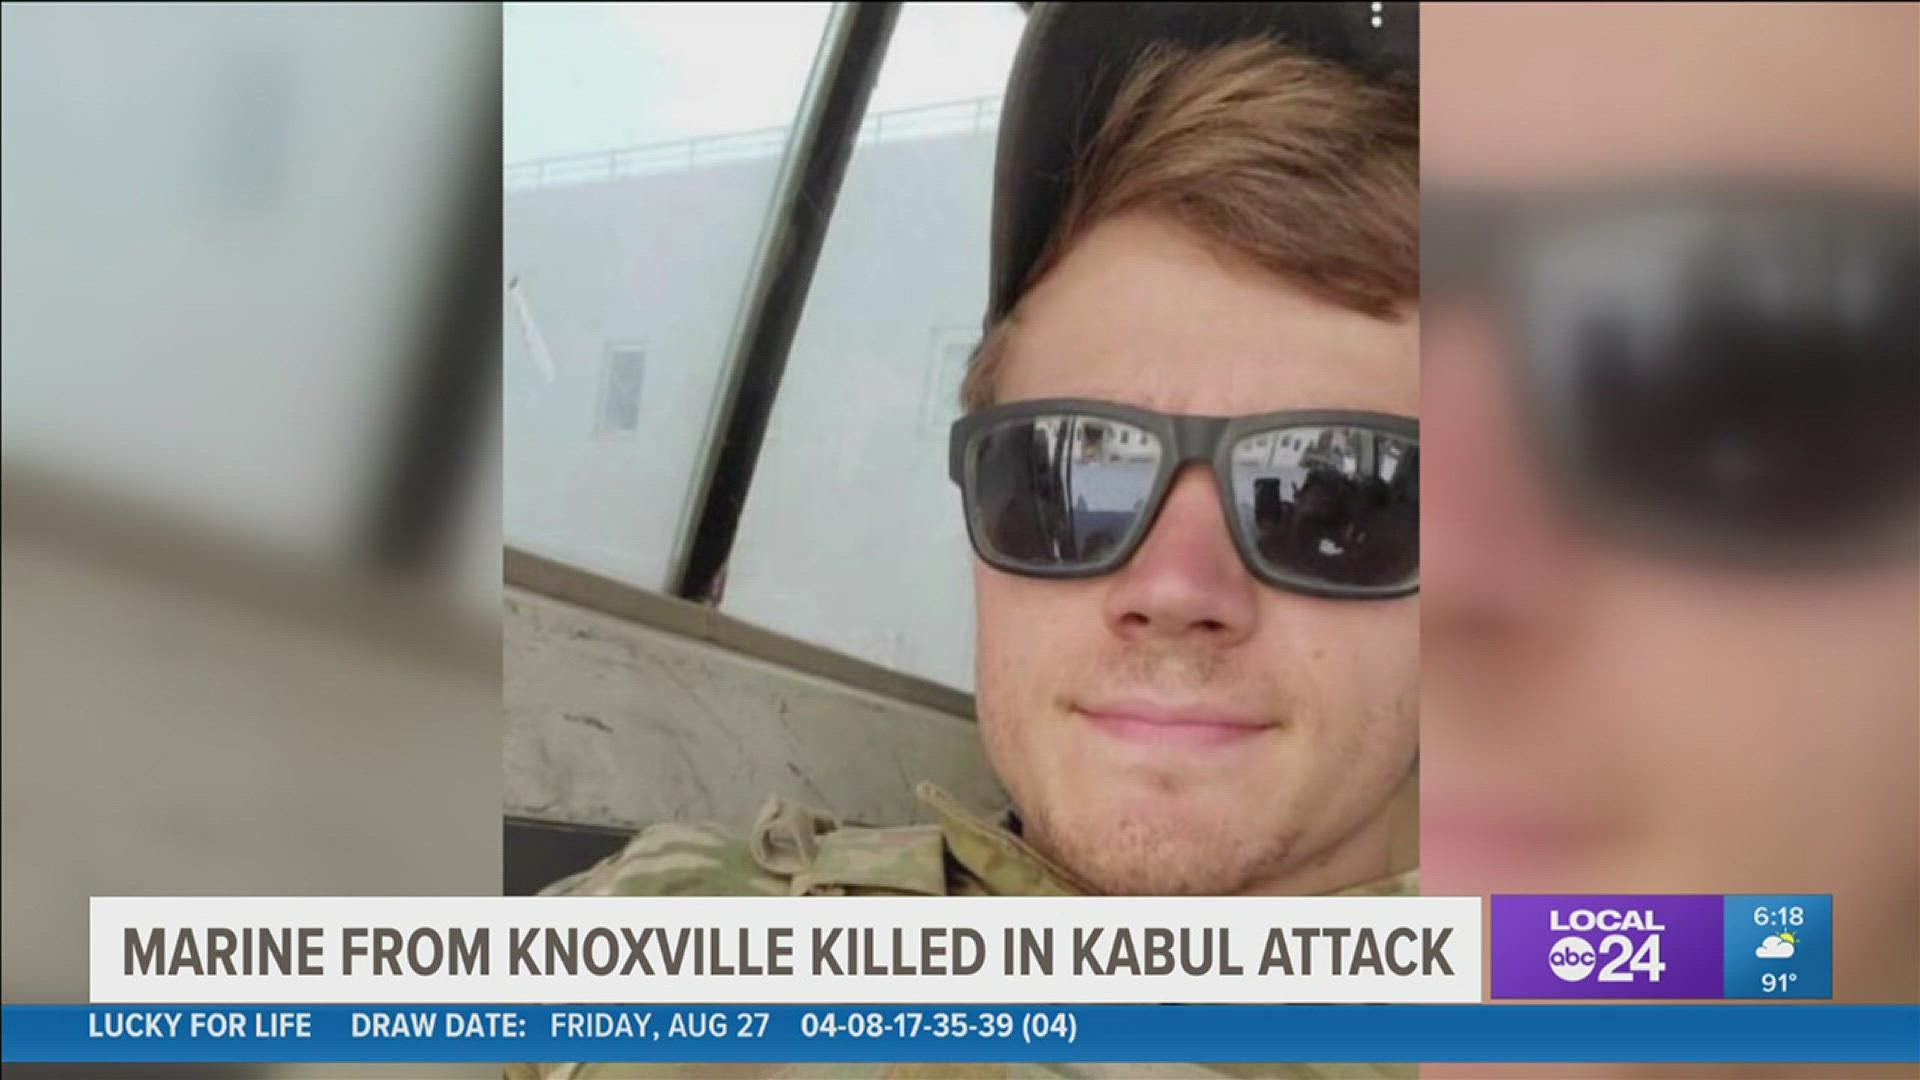 The Defense Department said Saturday that 23-year-old Army Staff Sgt. Ryan C. Knauss was killed in 
Thursday's bombing, along with 11 Marines and one Navy sailor.